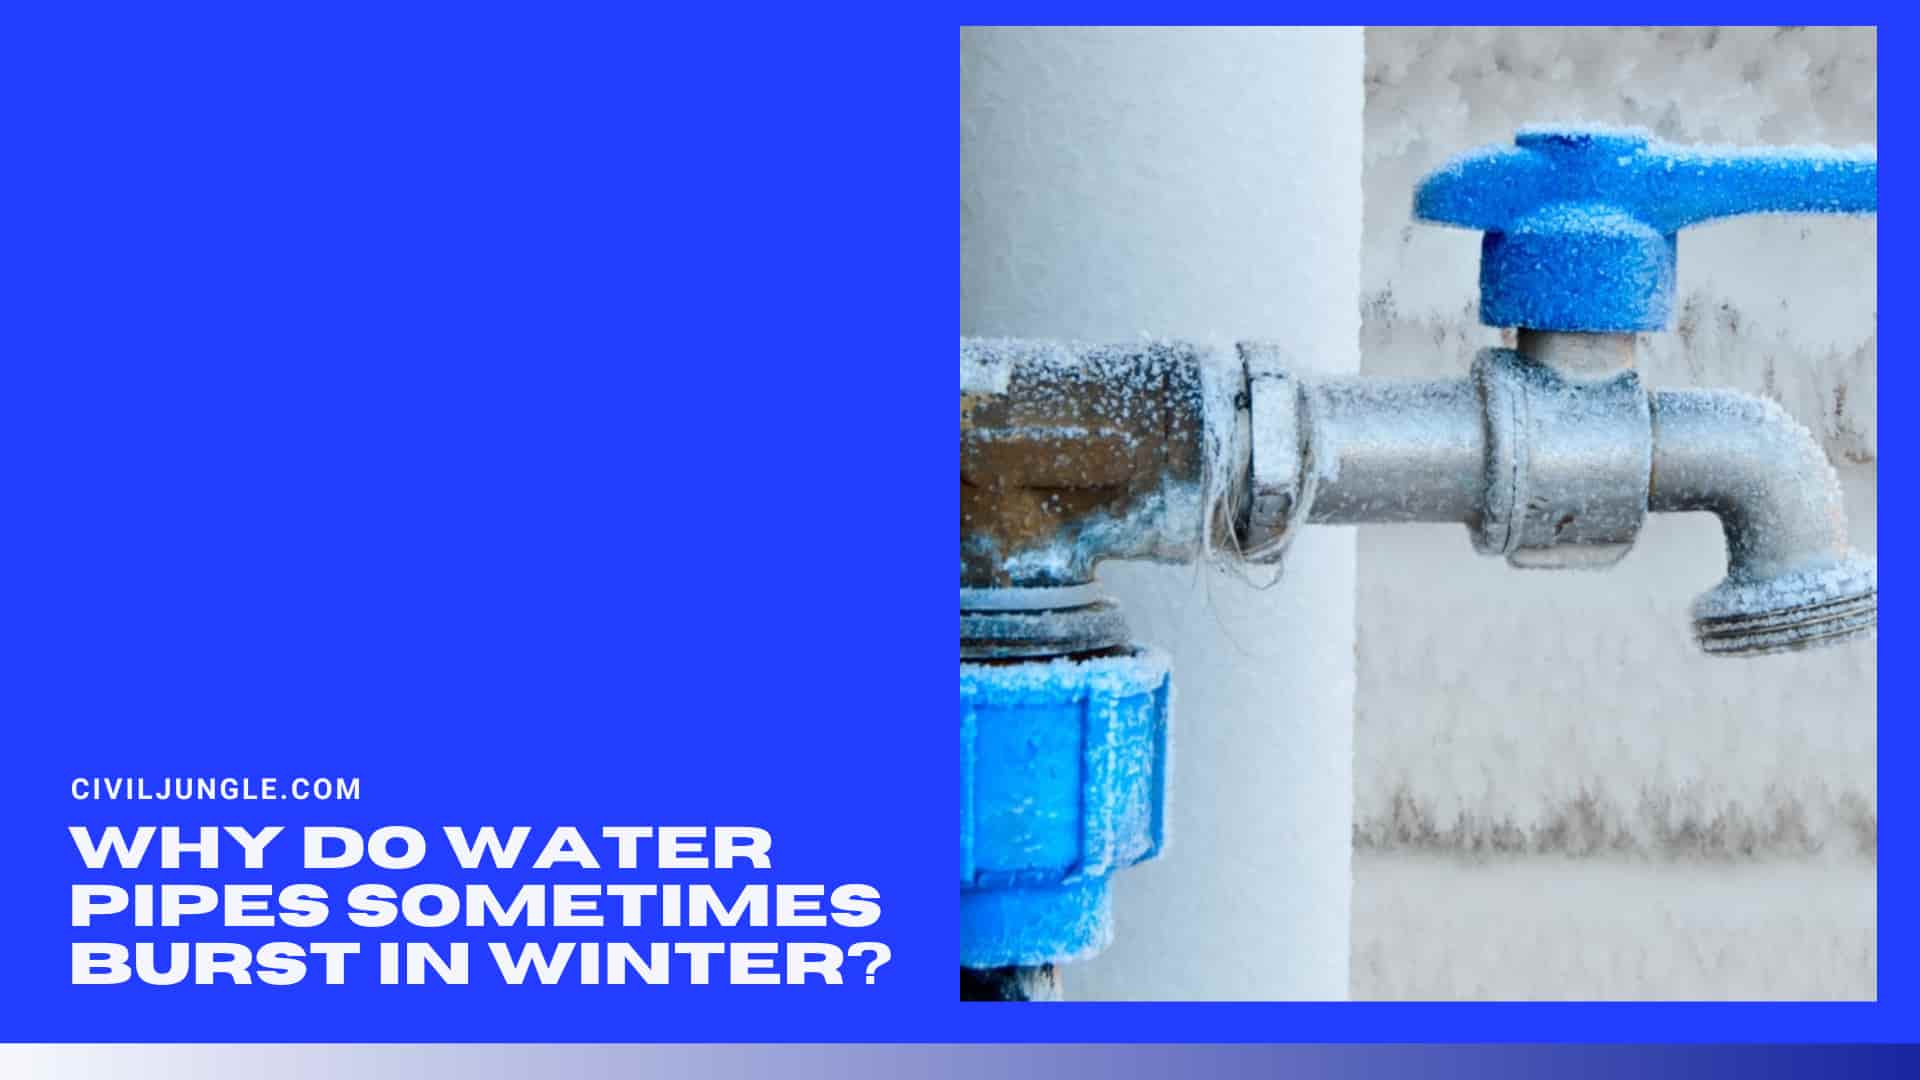 Why Do Water Pipes Sometimes Burst in Winter?